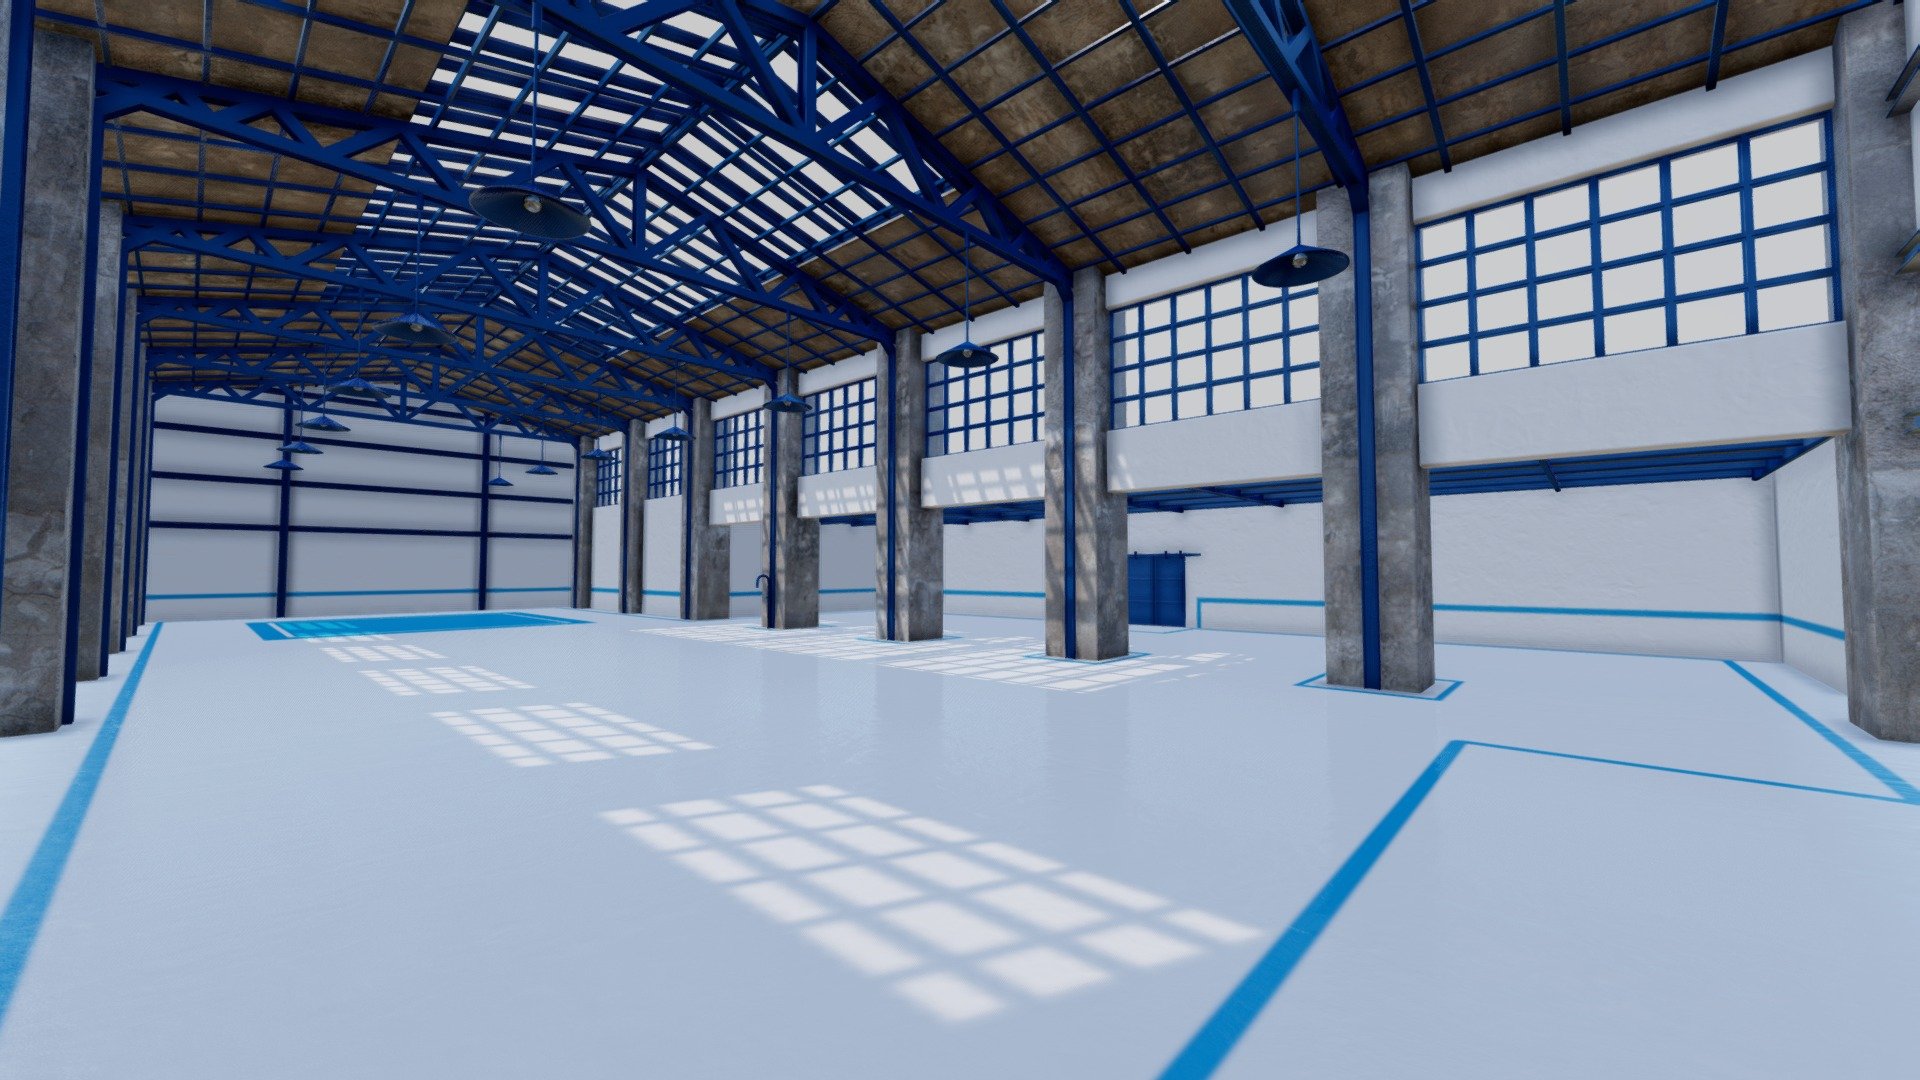 NOTE: Created in blender 2.82.1 using some newer nodes, if the shadows or textures look a bit different than in these renders, upgrading to 2.82 will solve these.

This product contains a fully rendered factory building with custom made texturepainted PBR floor and walls.

The scene is completely set up for eevee renders.

-All materials use normalmaps.

-The scene is made out of quads

-Tilable textures use a box projected overlapping UVmap for seamless results

-Painted textures use unwrapped non-overlapping UV’s

-Every material and object is named

-All files are exported from Blender with default settings.

-File extensions:

BLEND -FBX -OBJ -COLLADA/DAE -ABC -STL -GLB -PLY - SHC Factory Hall Renovated - Buy Royalty Free 3D model by denniswoo1993 3d model